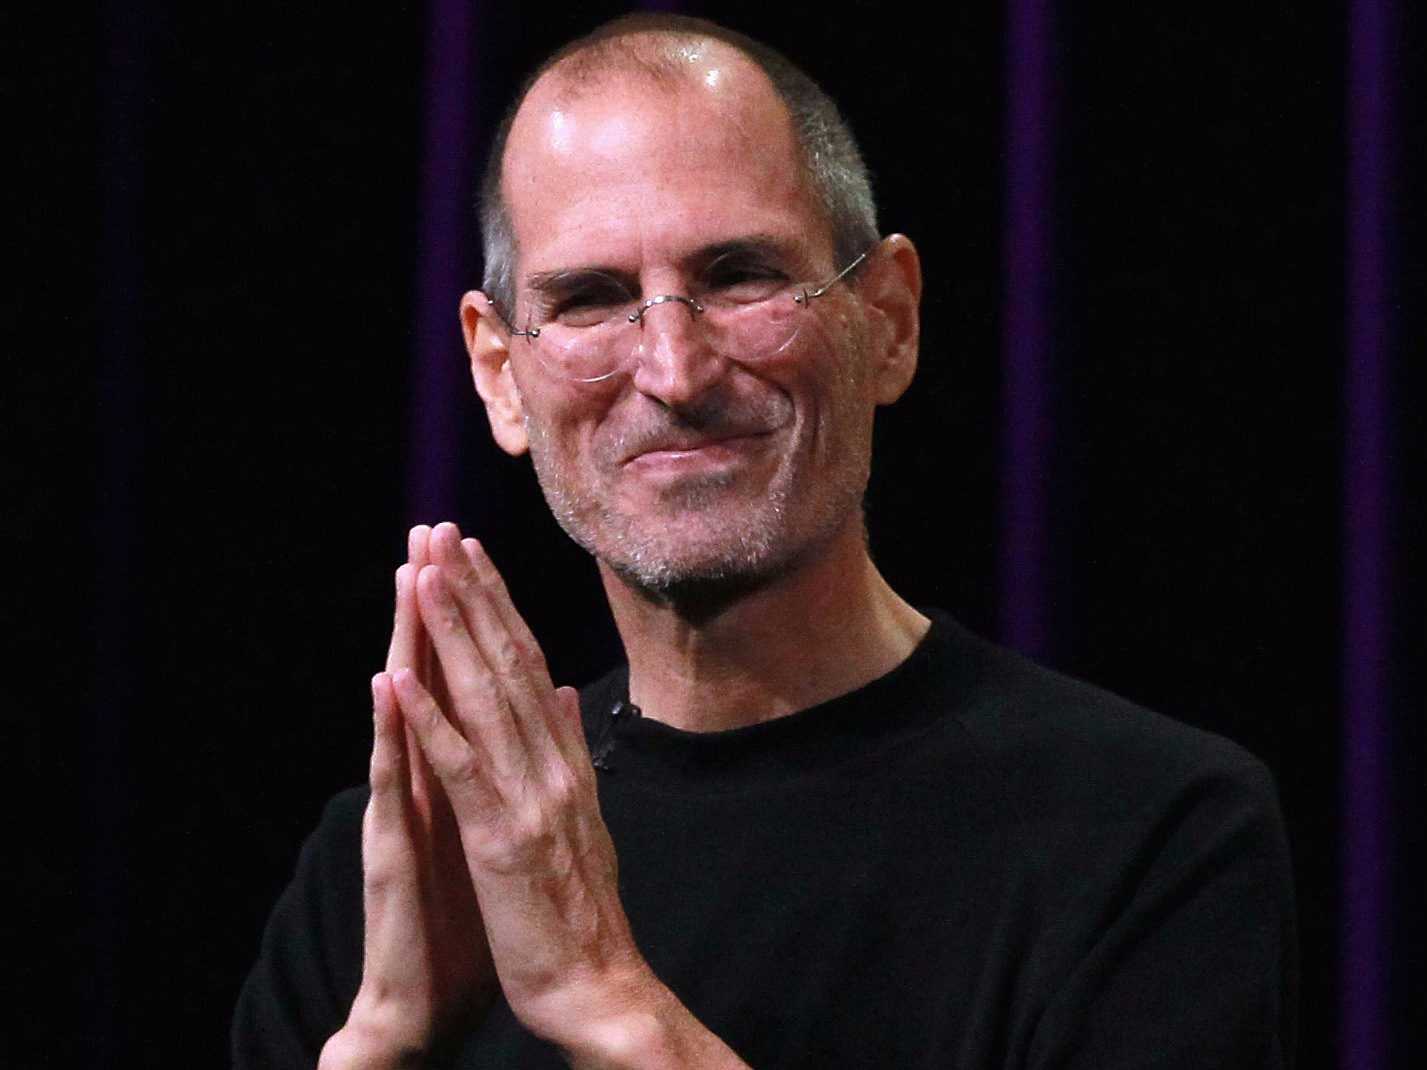 In 1997, Apple Stock hit a 12-year low in that was at least partially caused by a single sale of 1.5 million shares ($22.5 million) by an anonymous party. This helped Jobs convince the board to oust CEO Gil Amelio and appoint him as the replacement. Jobs was revealed to be the anonymous party